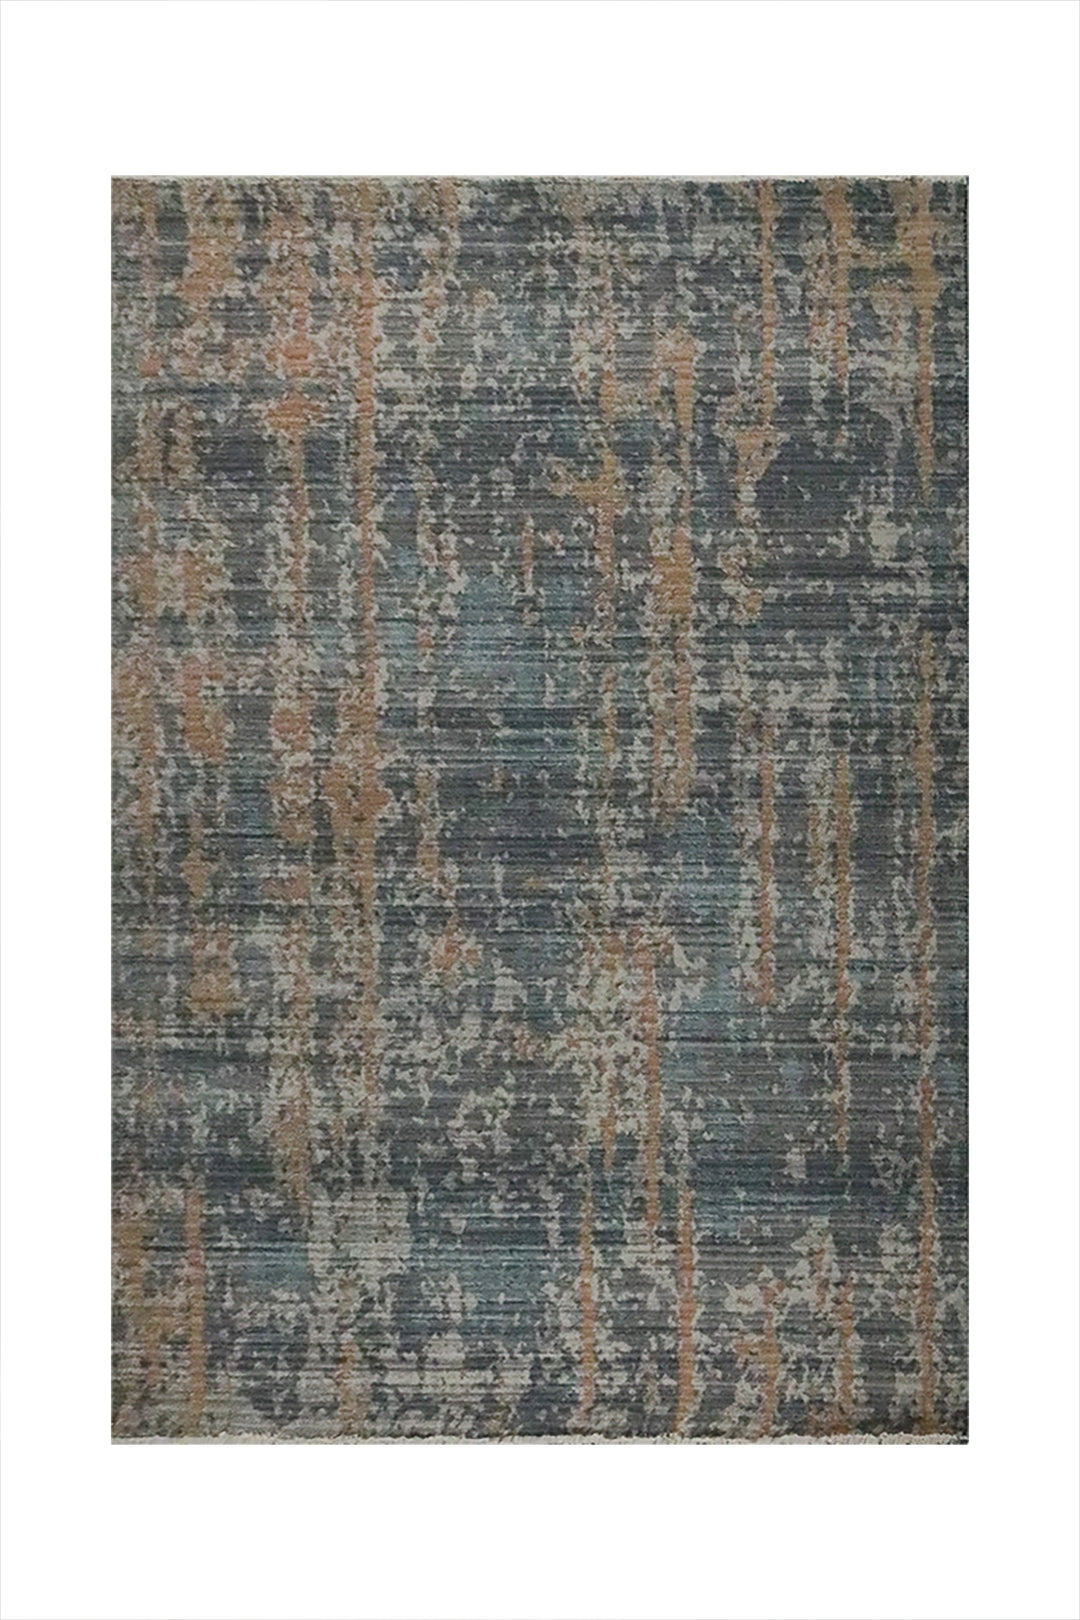 Turkish Modern Festival Plus Rug - 5.2 x 7.5 FT - Gray - Superior Comfort, Modern Style Accent Rugs